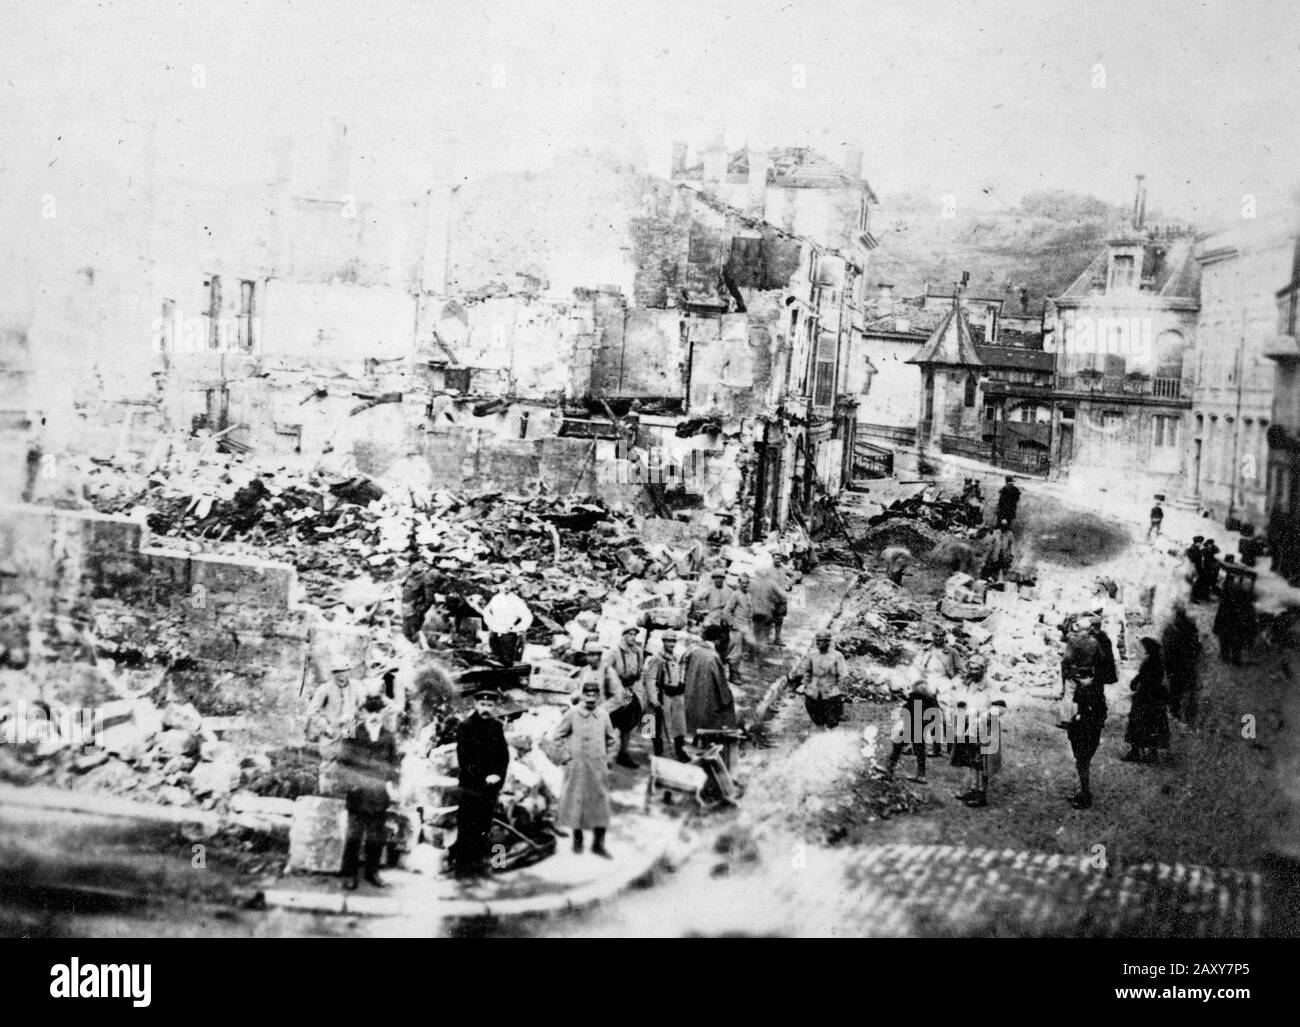 A crowd gathers in what's left of a French village after bombardment during World War I, ca. 1918. Stock Photo